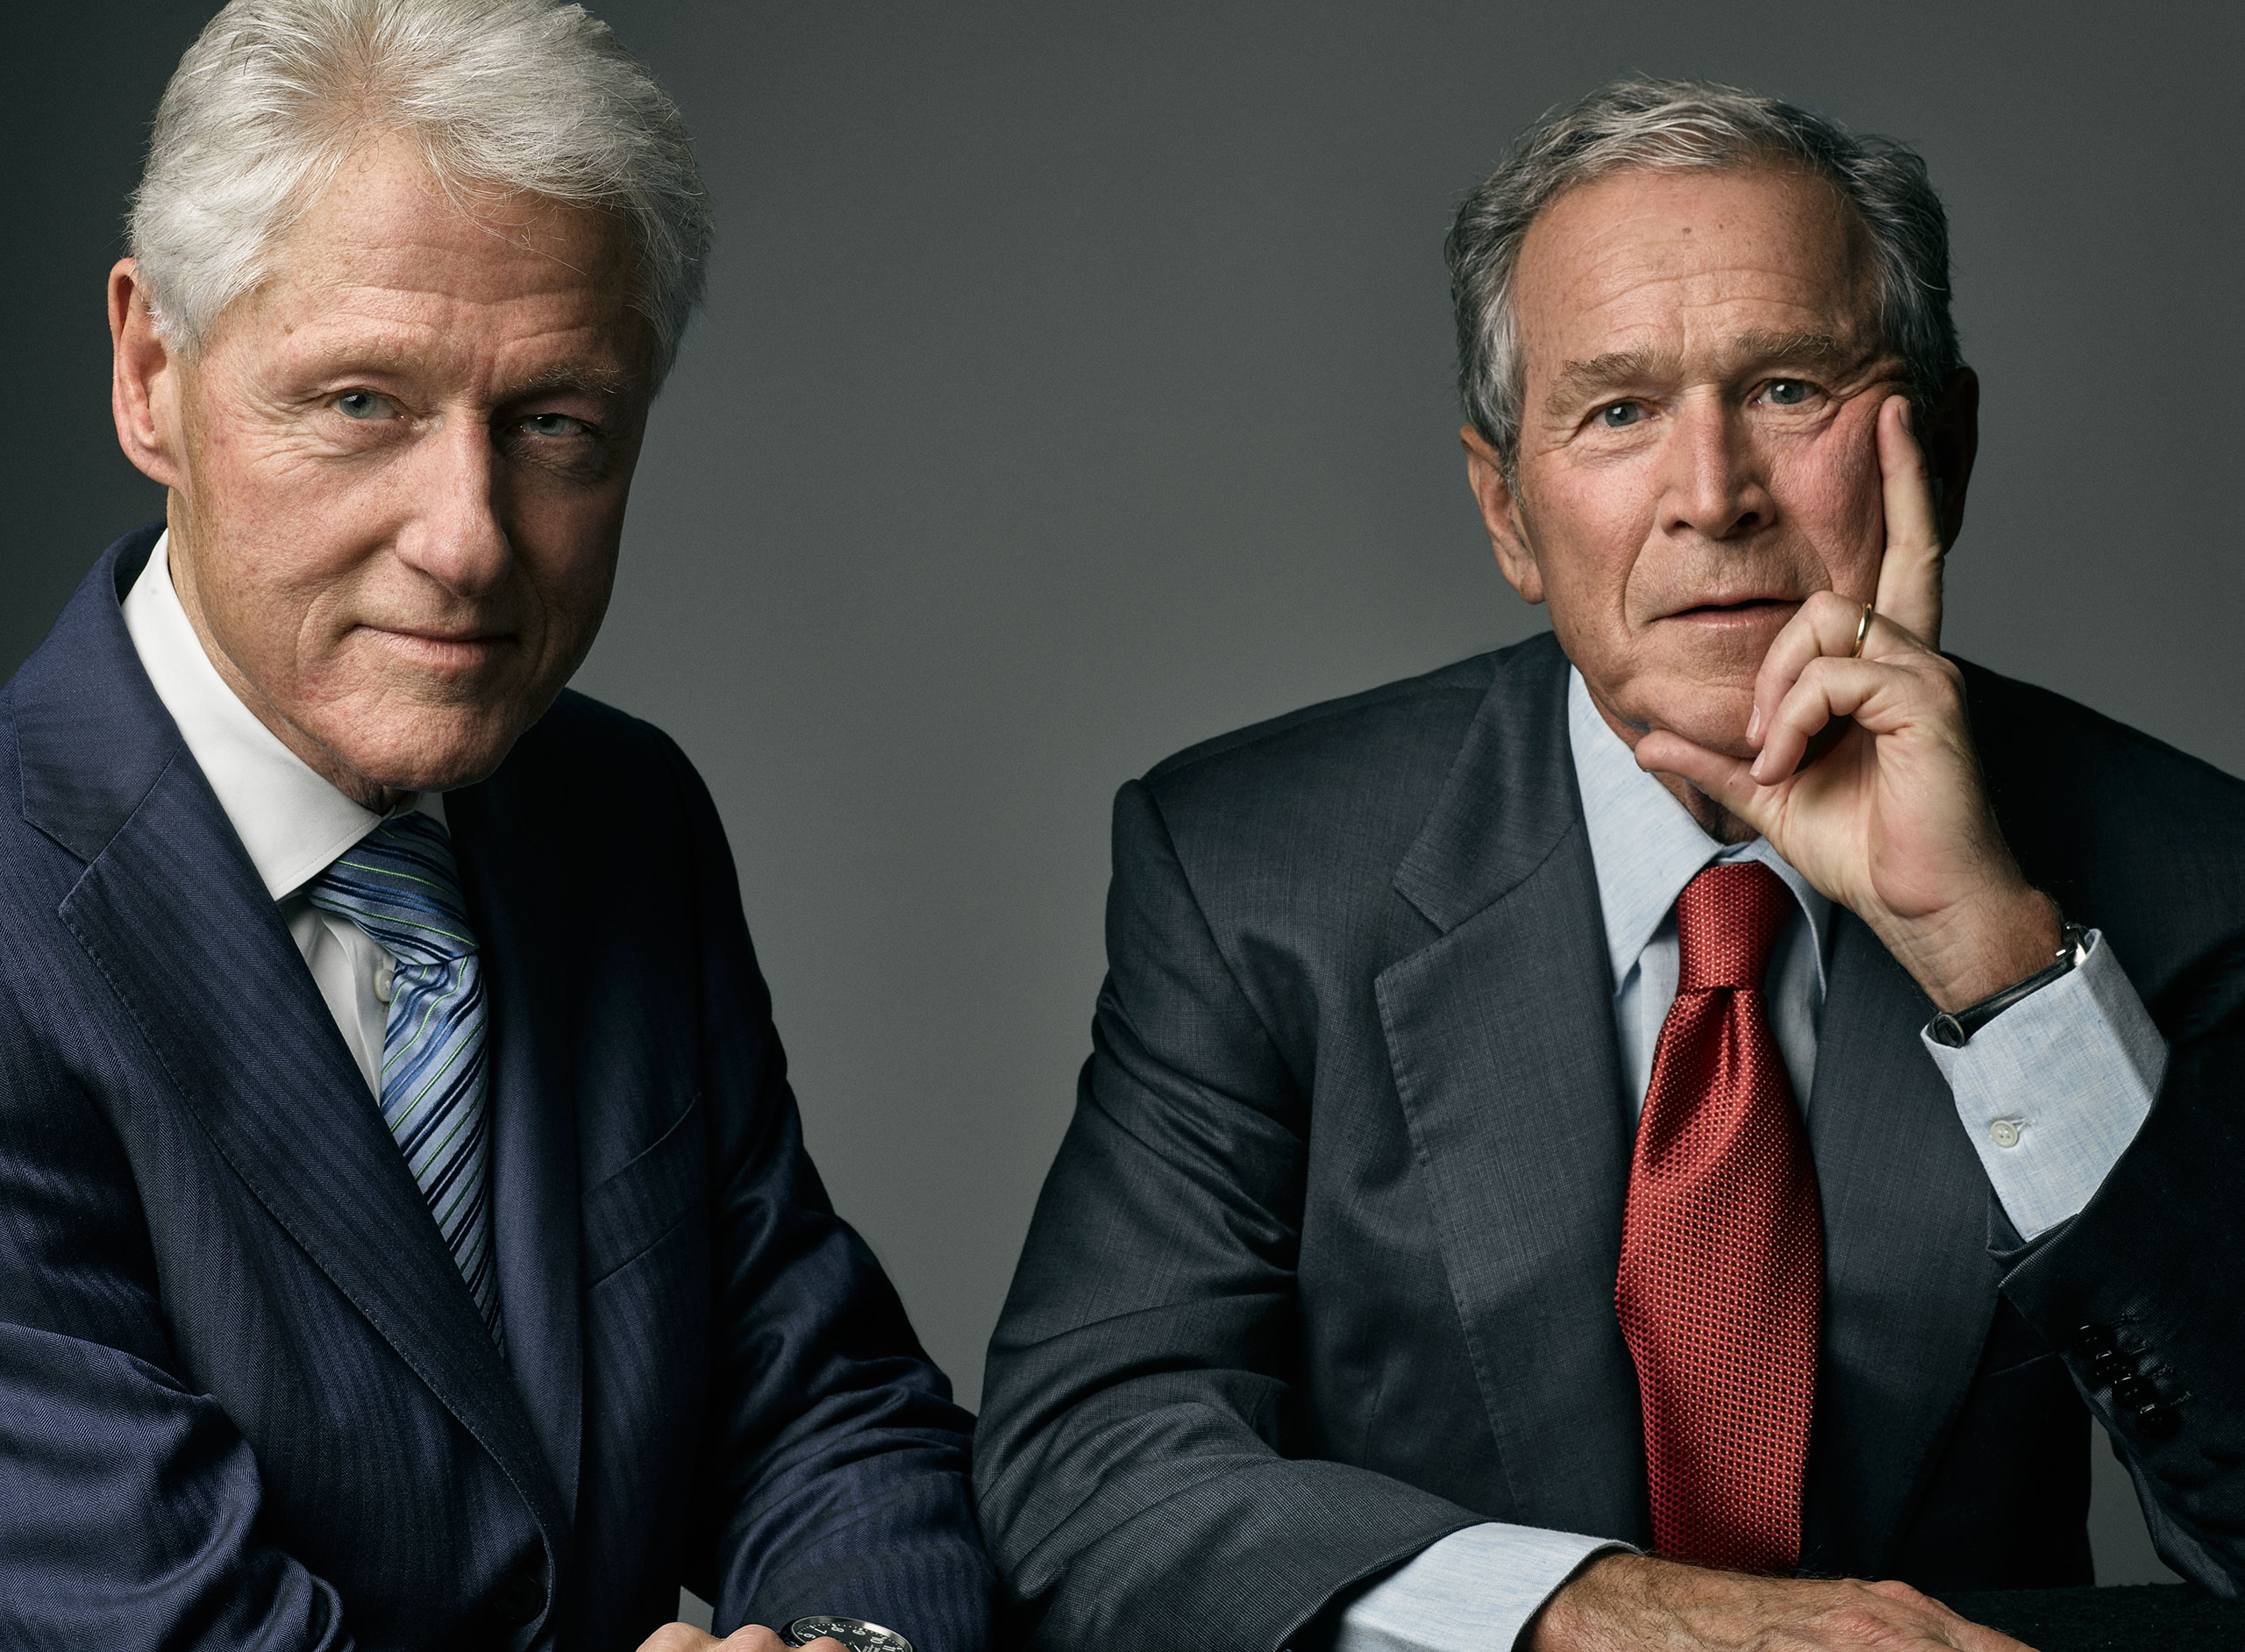 Presidents George W. Bush and Bill Clinton photographed at the George W. Bush Presidential Library in Dallas, Texas, July 9, 2015. From  Game of Thrones.  August 3, 2015 issue.